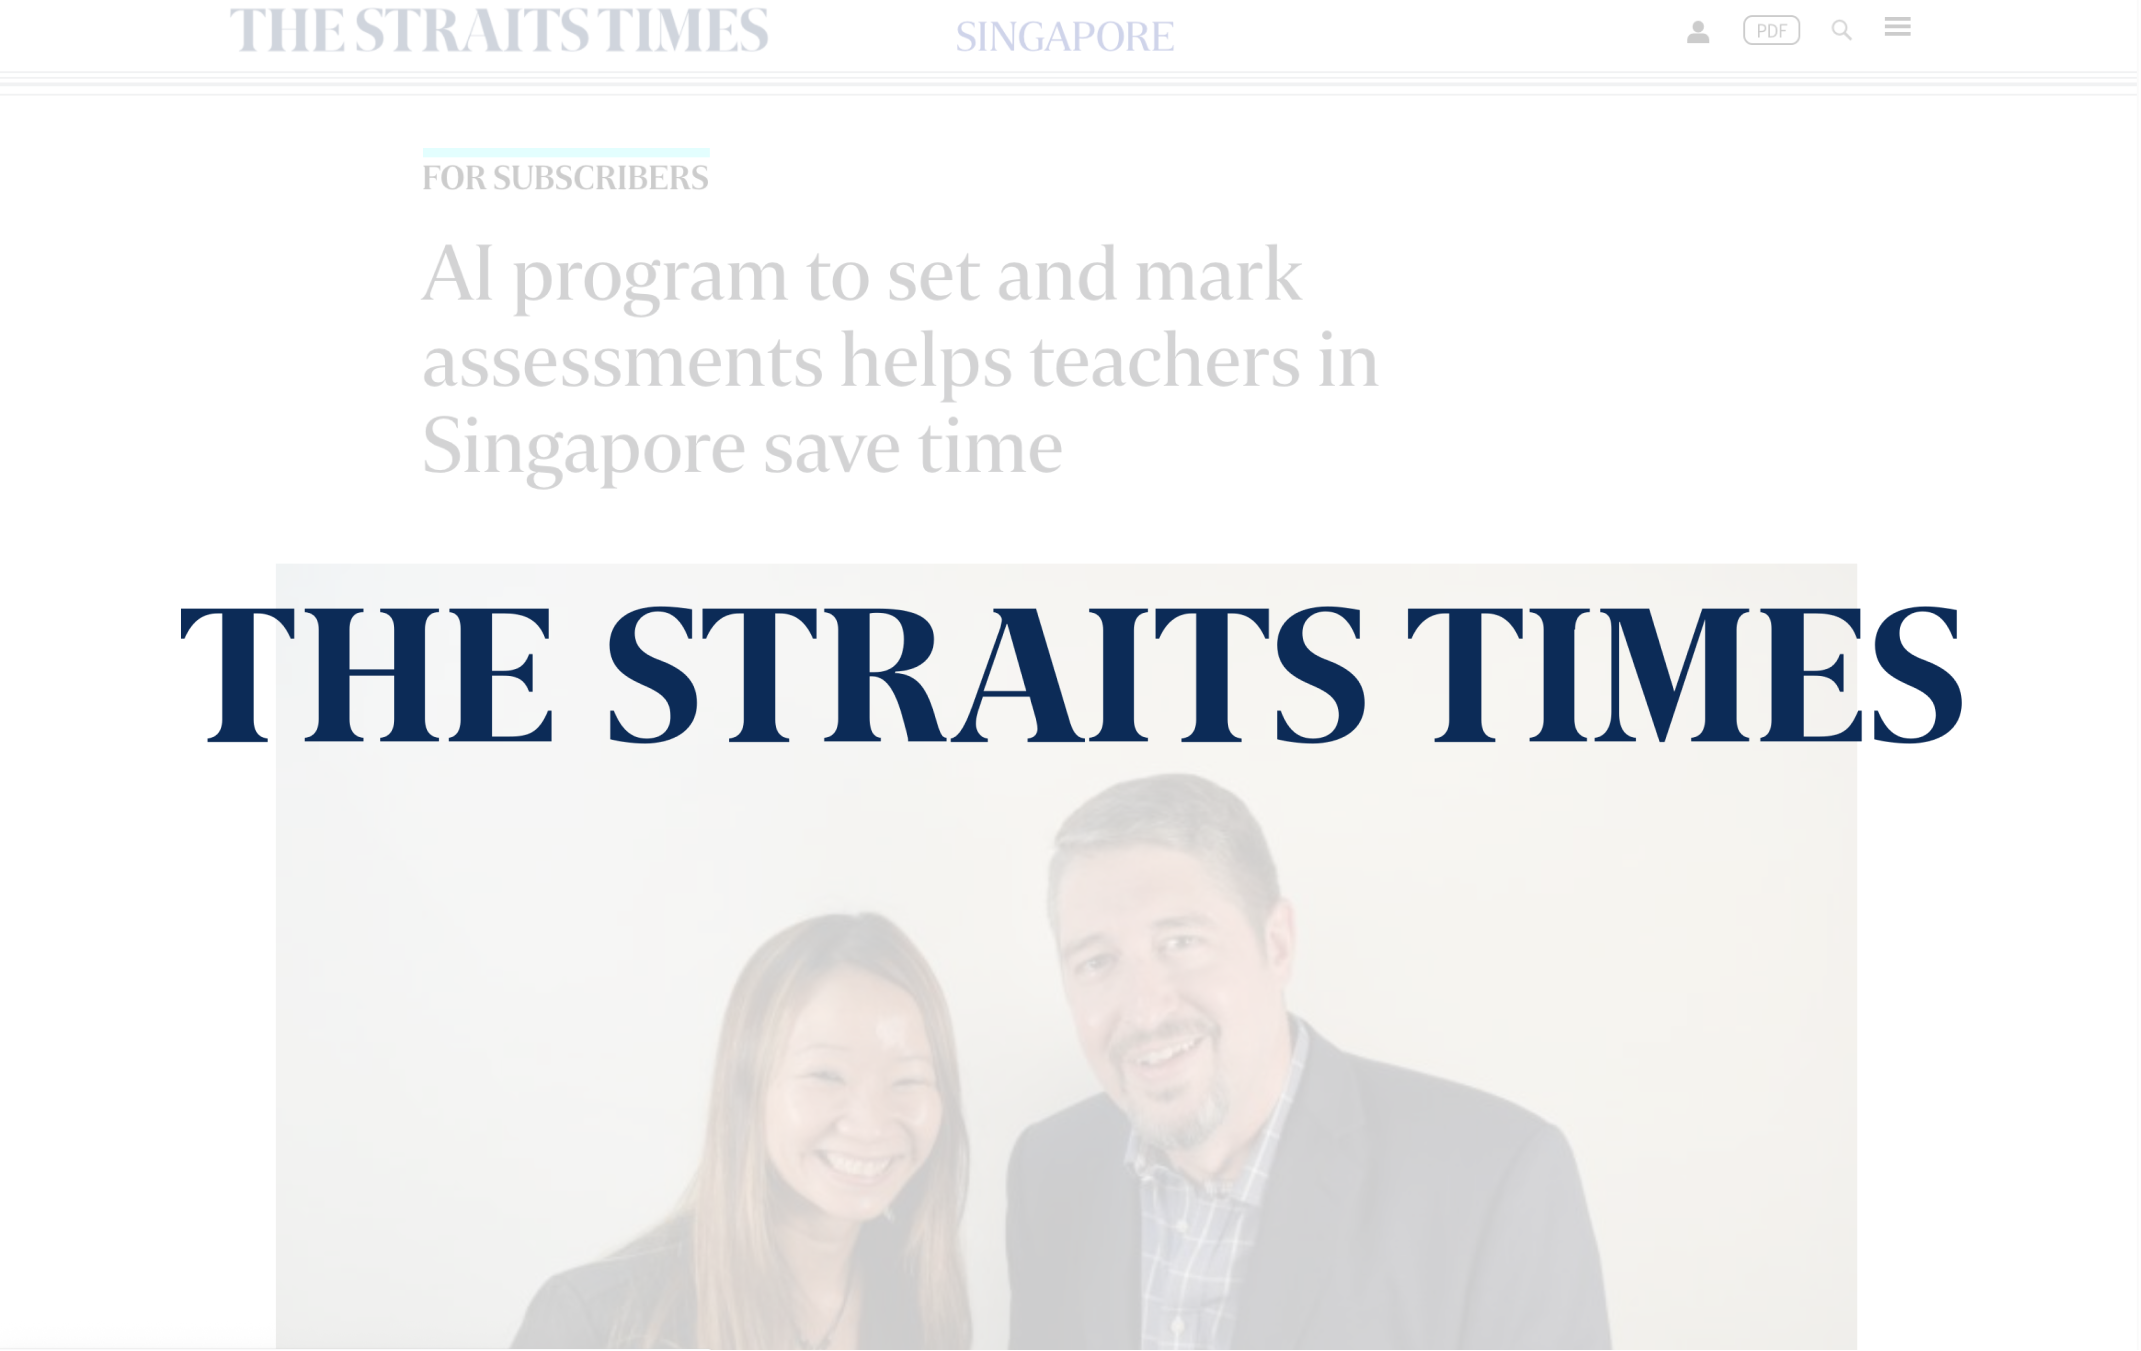 AI program to set and mark assessments helps teachers in Singapore save time